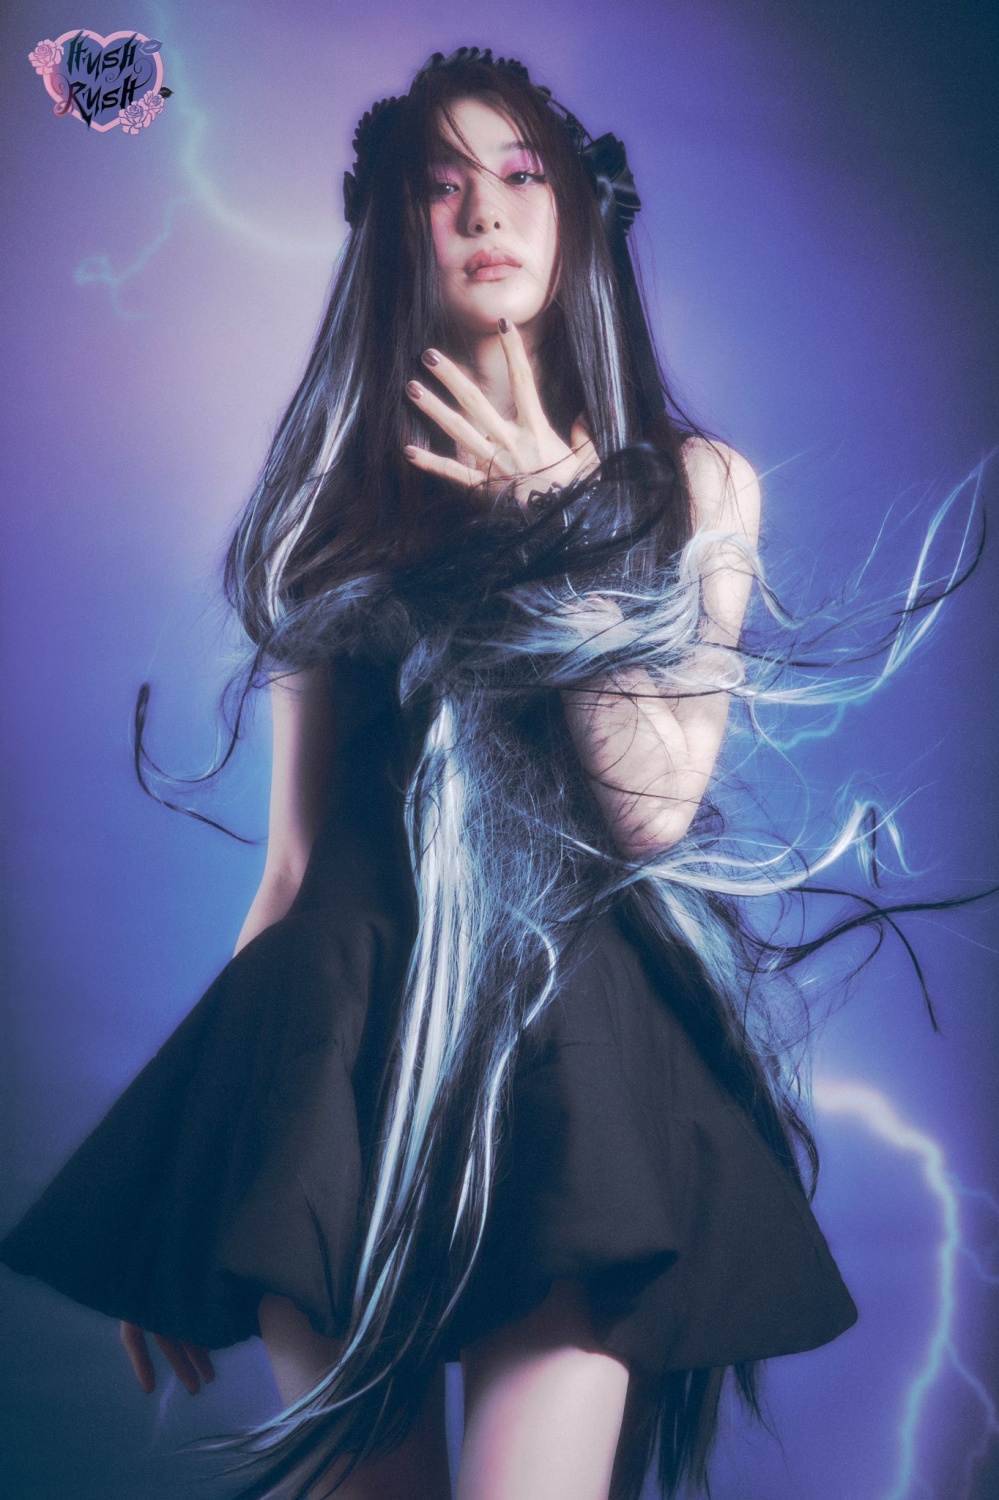 'Solo Debut' Lee Chae-yeon, 'HUSH RUSH' concept photo released... vampire transformation